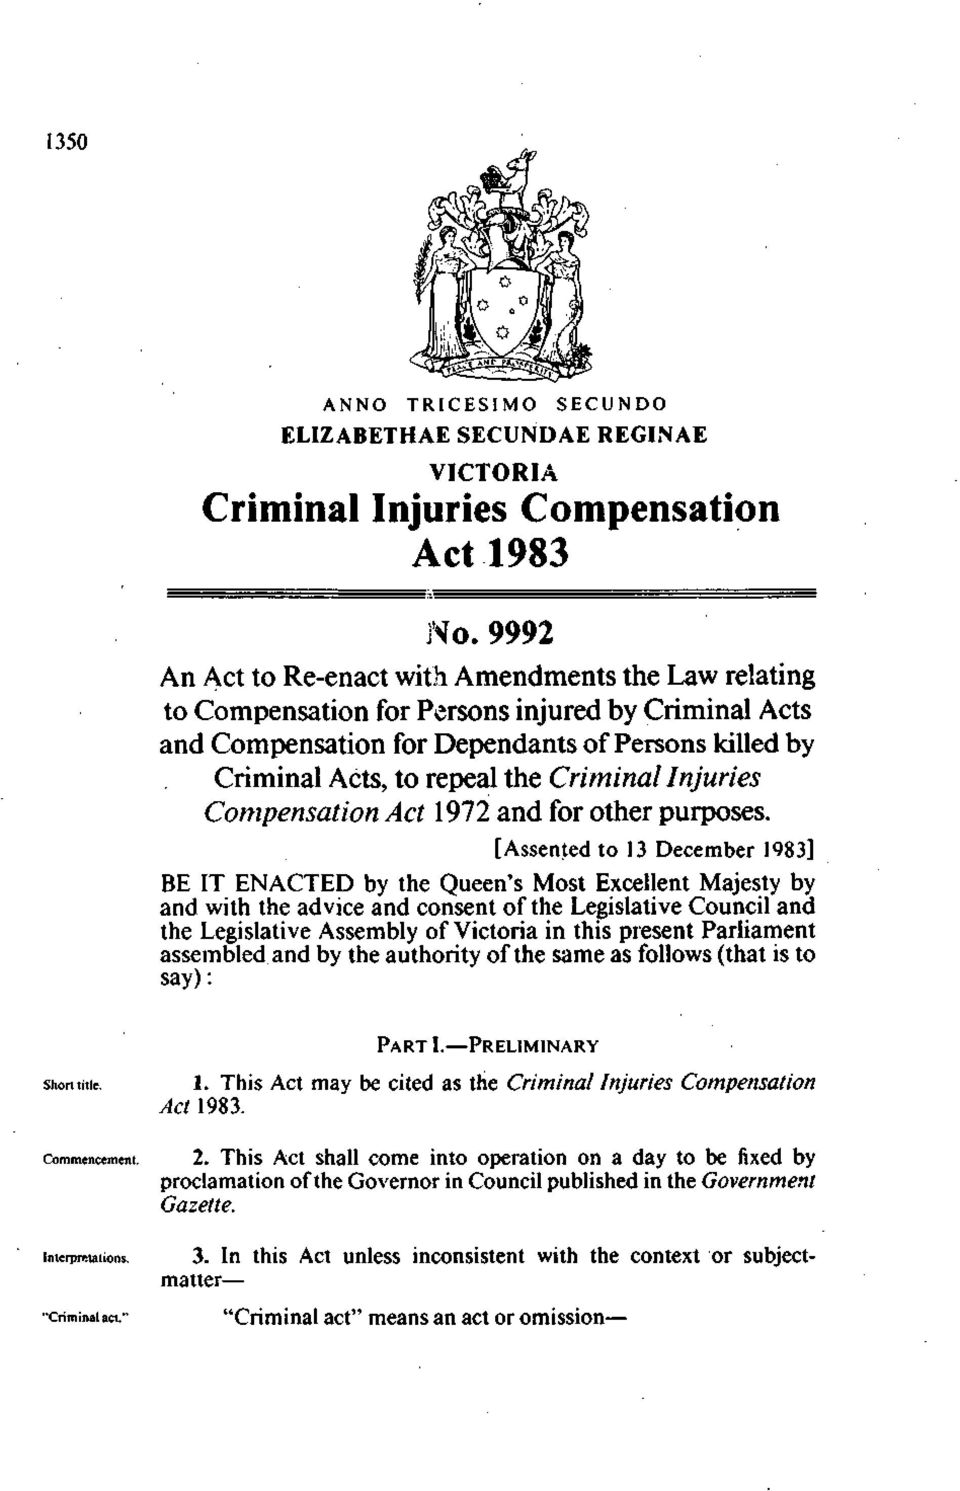 Criminal Injuries Compensation Act 1972 and for other purposes.